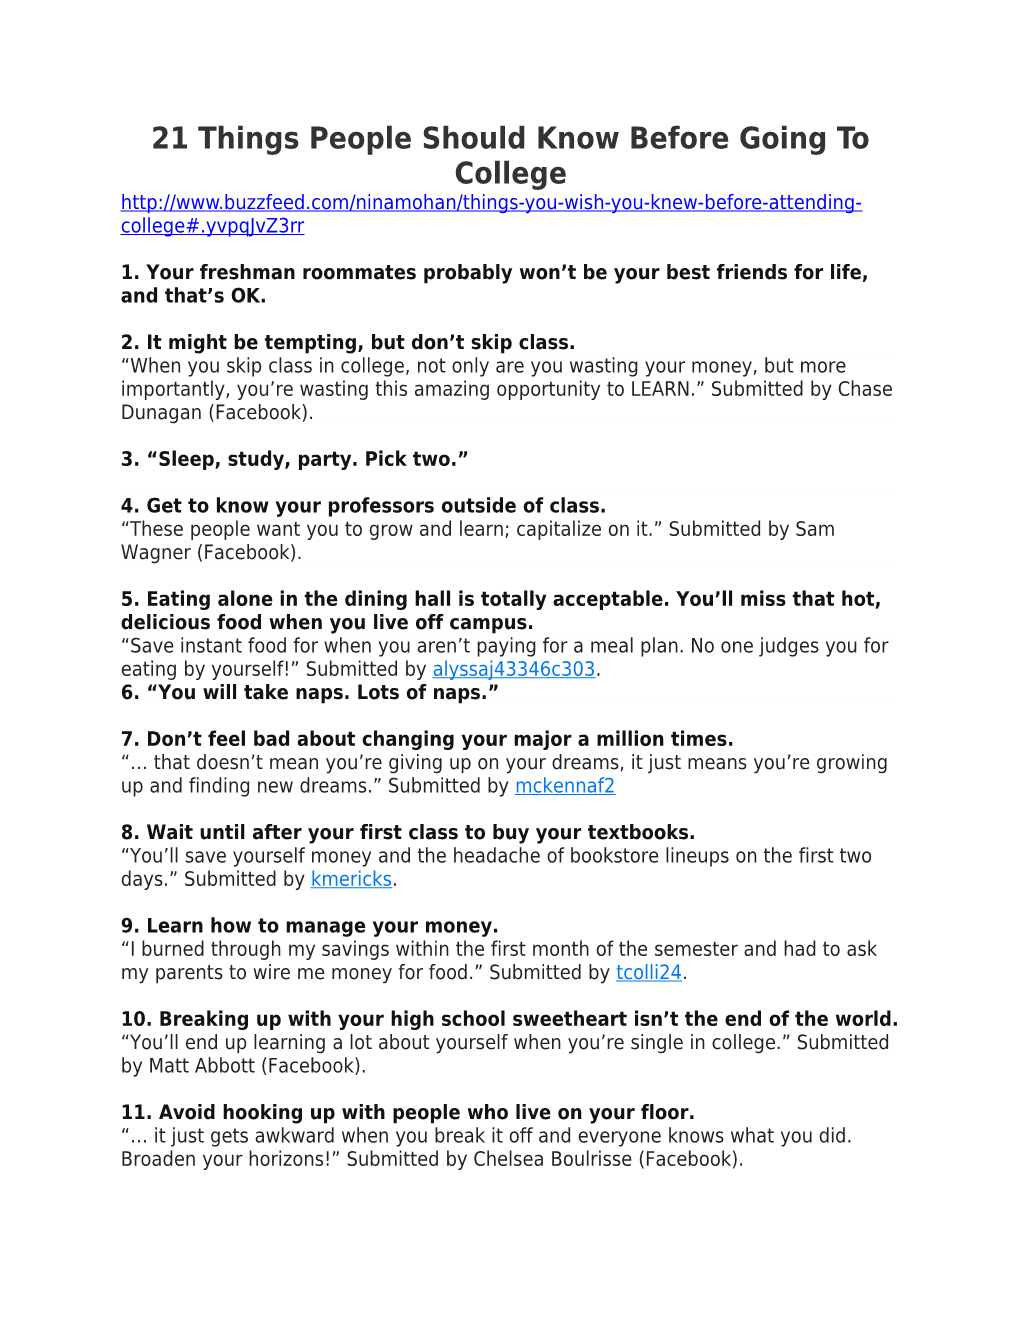 21 Things People Should Know Before Going to College